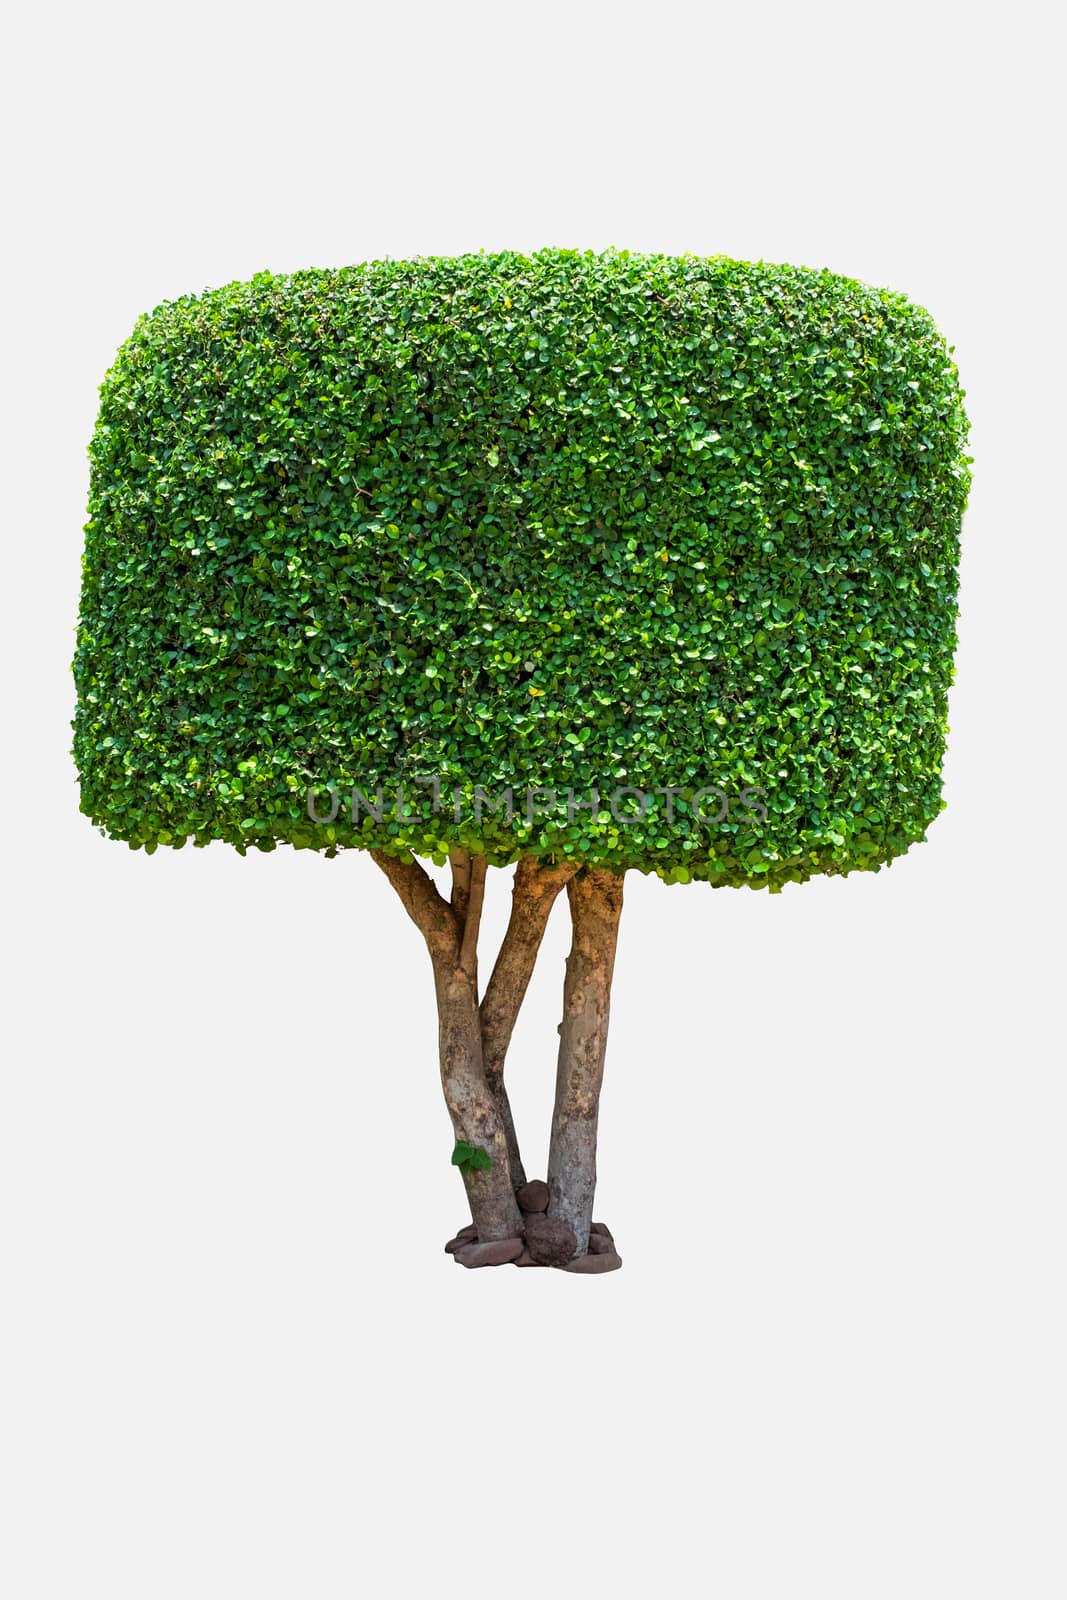 tree square isolate on white with clipping path 